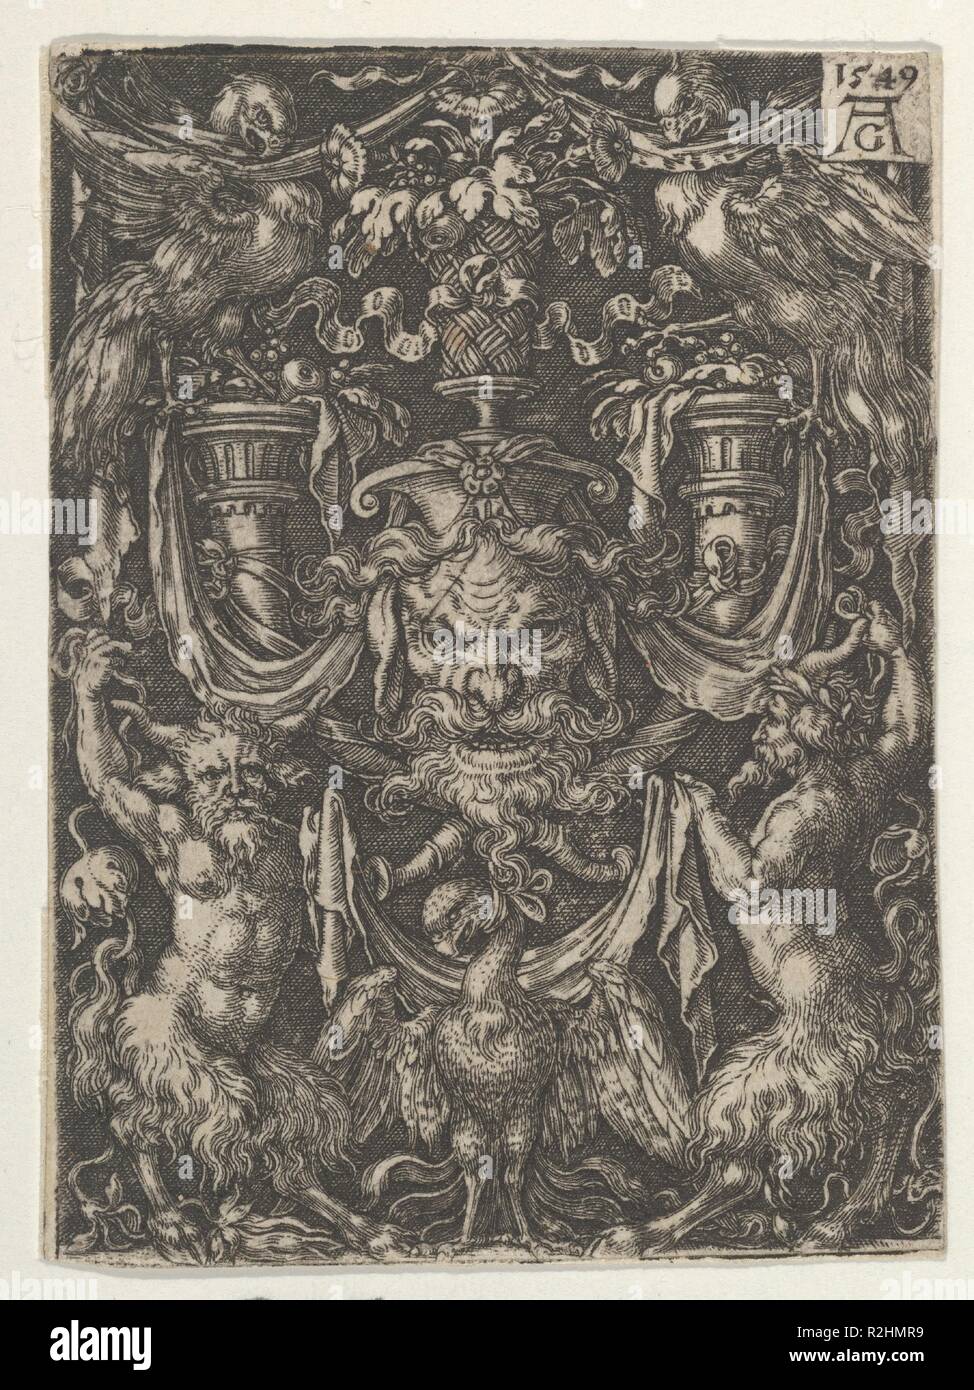 Ornamental Design with a Mask and an Eagle between Two Fauns below. Artist: Heinrich Aldegrever (German, Paderborn ca. 1502-1555/1561 Soest). Dimensions: Sheet: 2 5/8 × 1 15/16 in. (6.7 × 4.9 cm). Date: 1549.  Ornamental design with mask at center flanked by two cornucopias. Below, there is an eagle between two fauns who hold a cloth that drapes behind the eagle. At the top, two eagles perch on the cornucopias, facing inwards. Museum: Metropolitan Museum of Art, New York, USA. Stock Photo